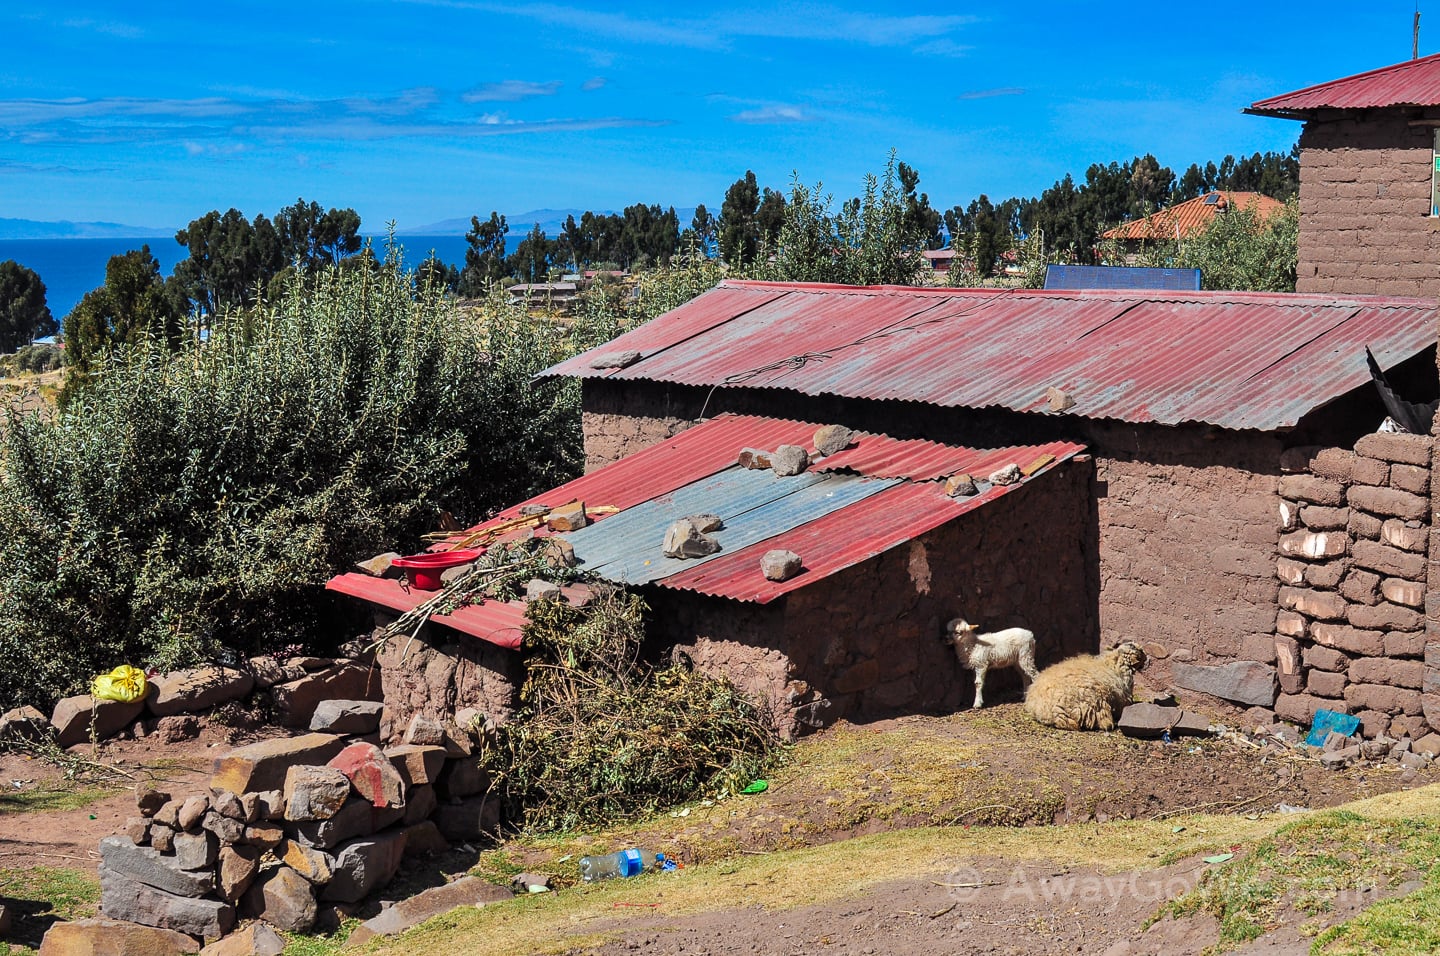 large rocks hold metal roofing on Lake Titicaca